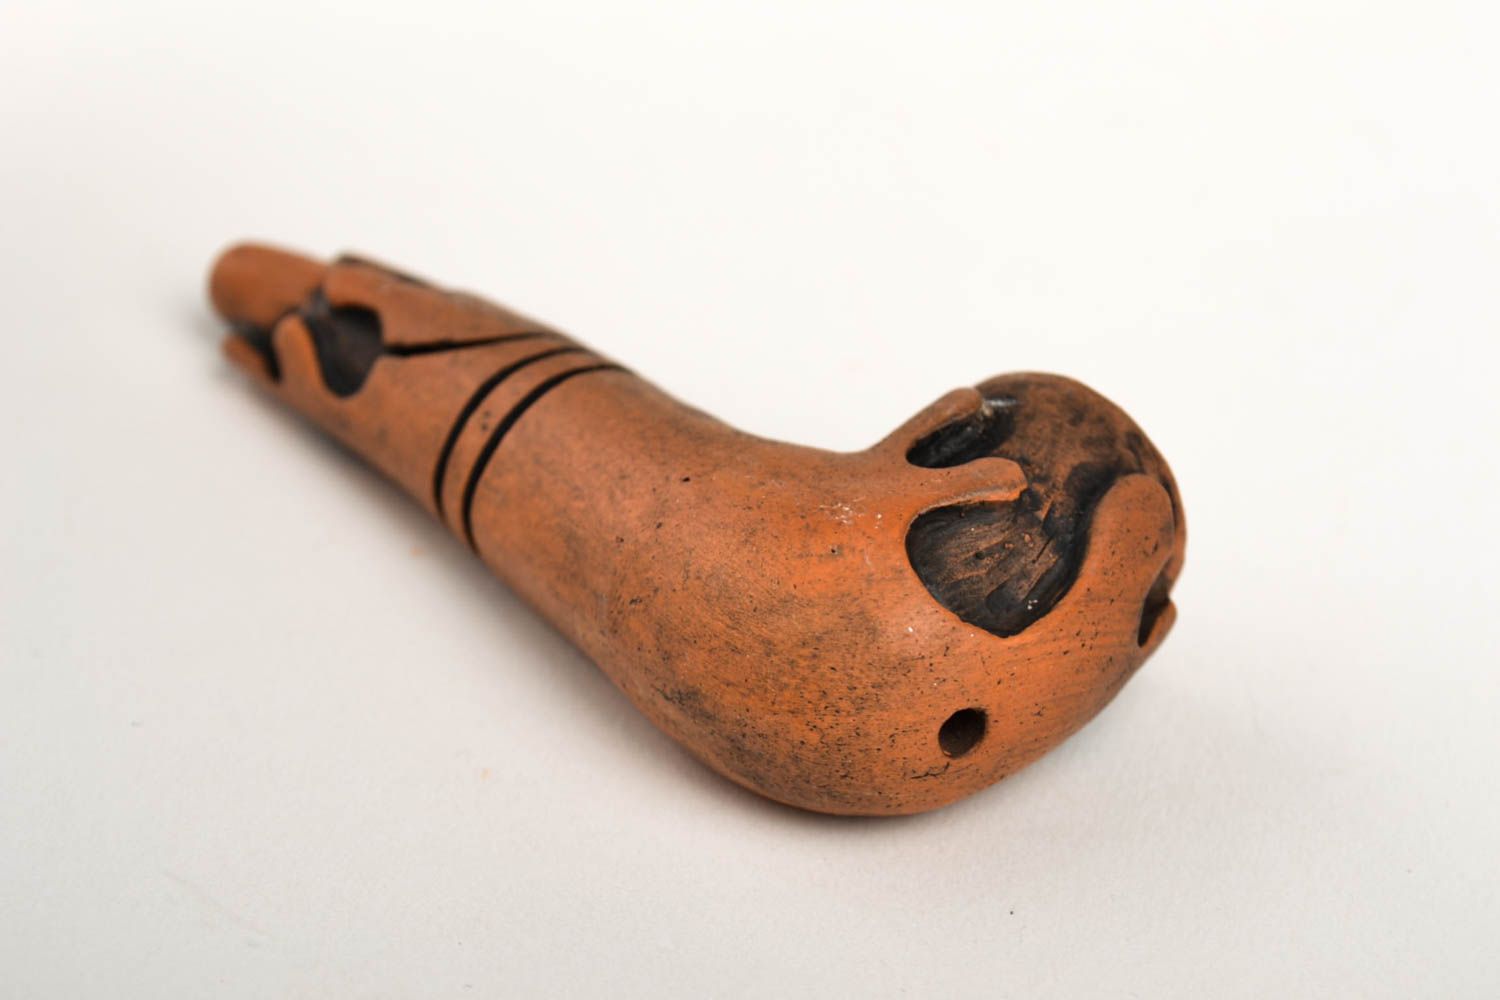 Molded clay smoking pipe clay smoking pipe present for friend smoking accessory photo 4